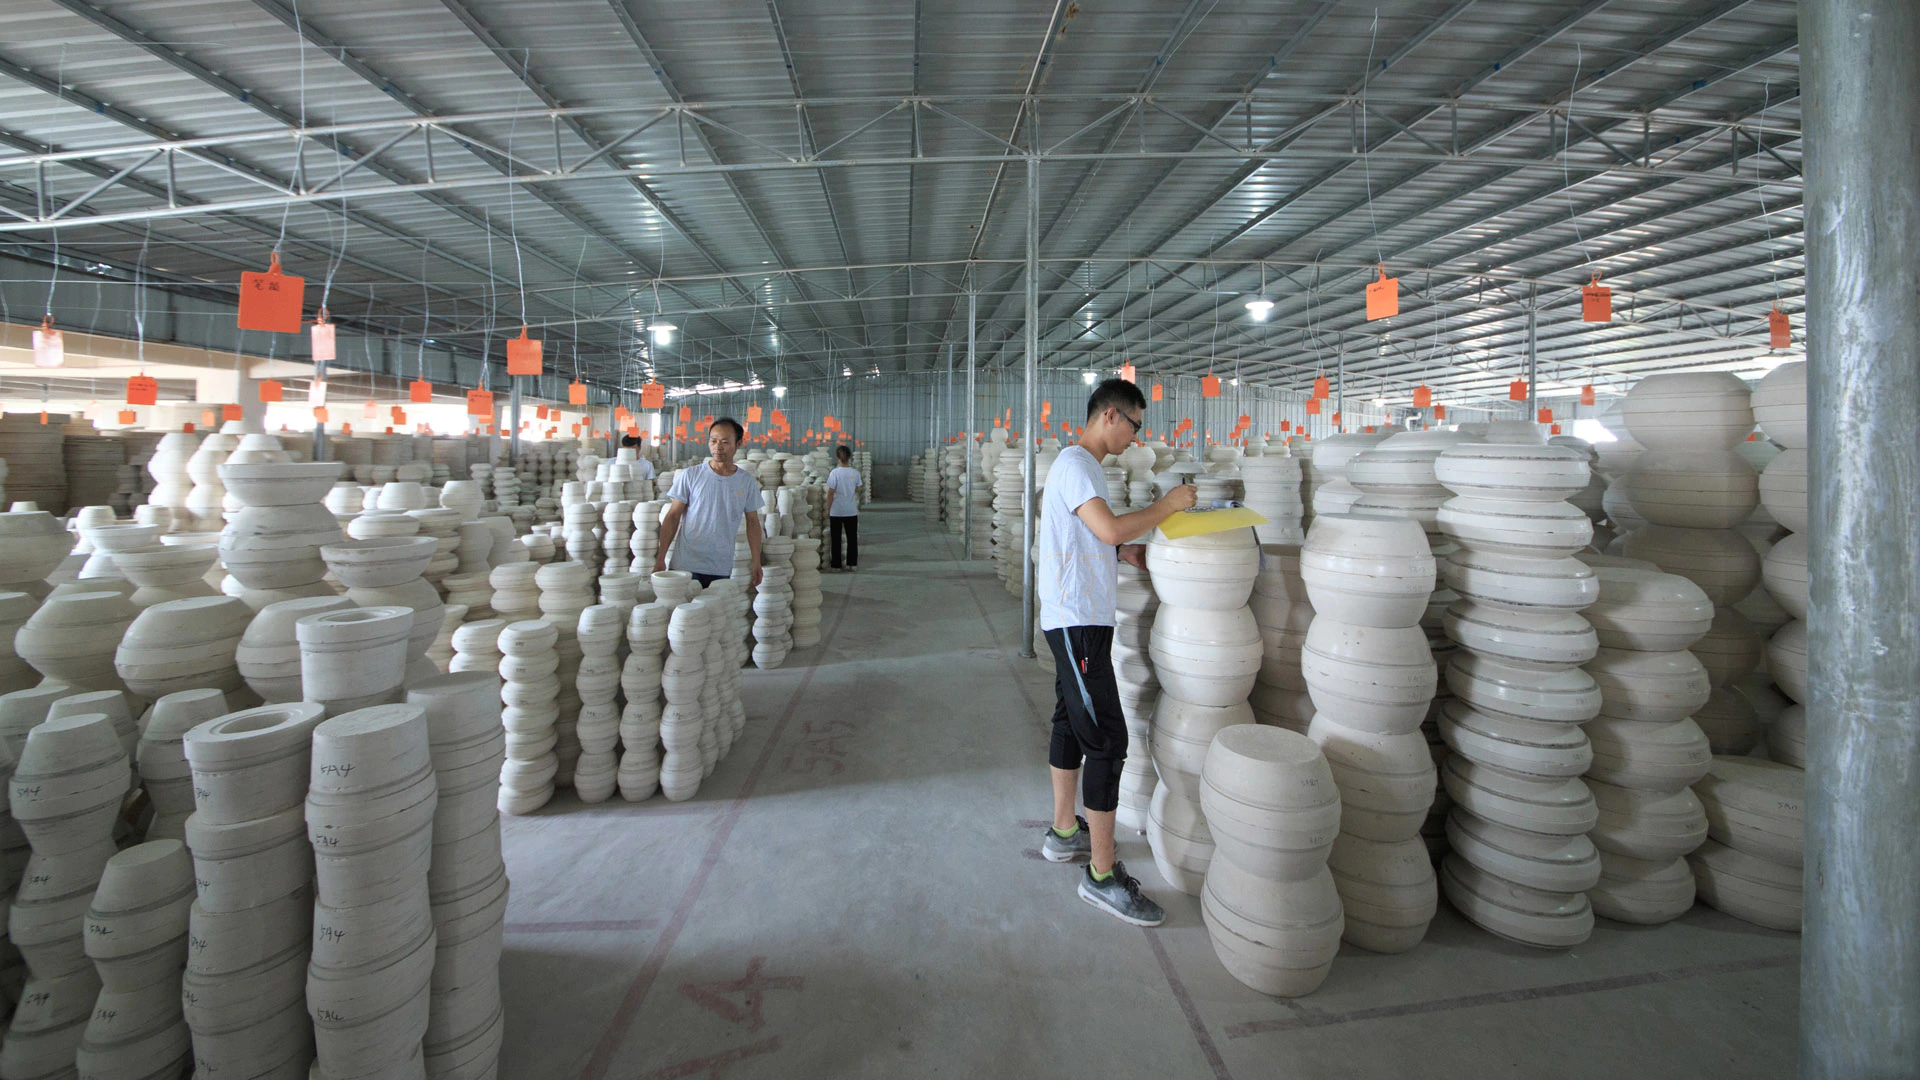 The second floor of the two eight Ceramics Factory - Molded Warehouse